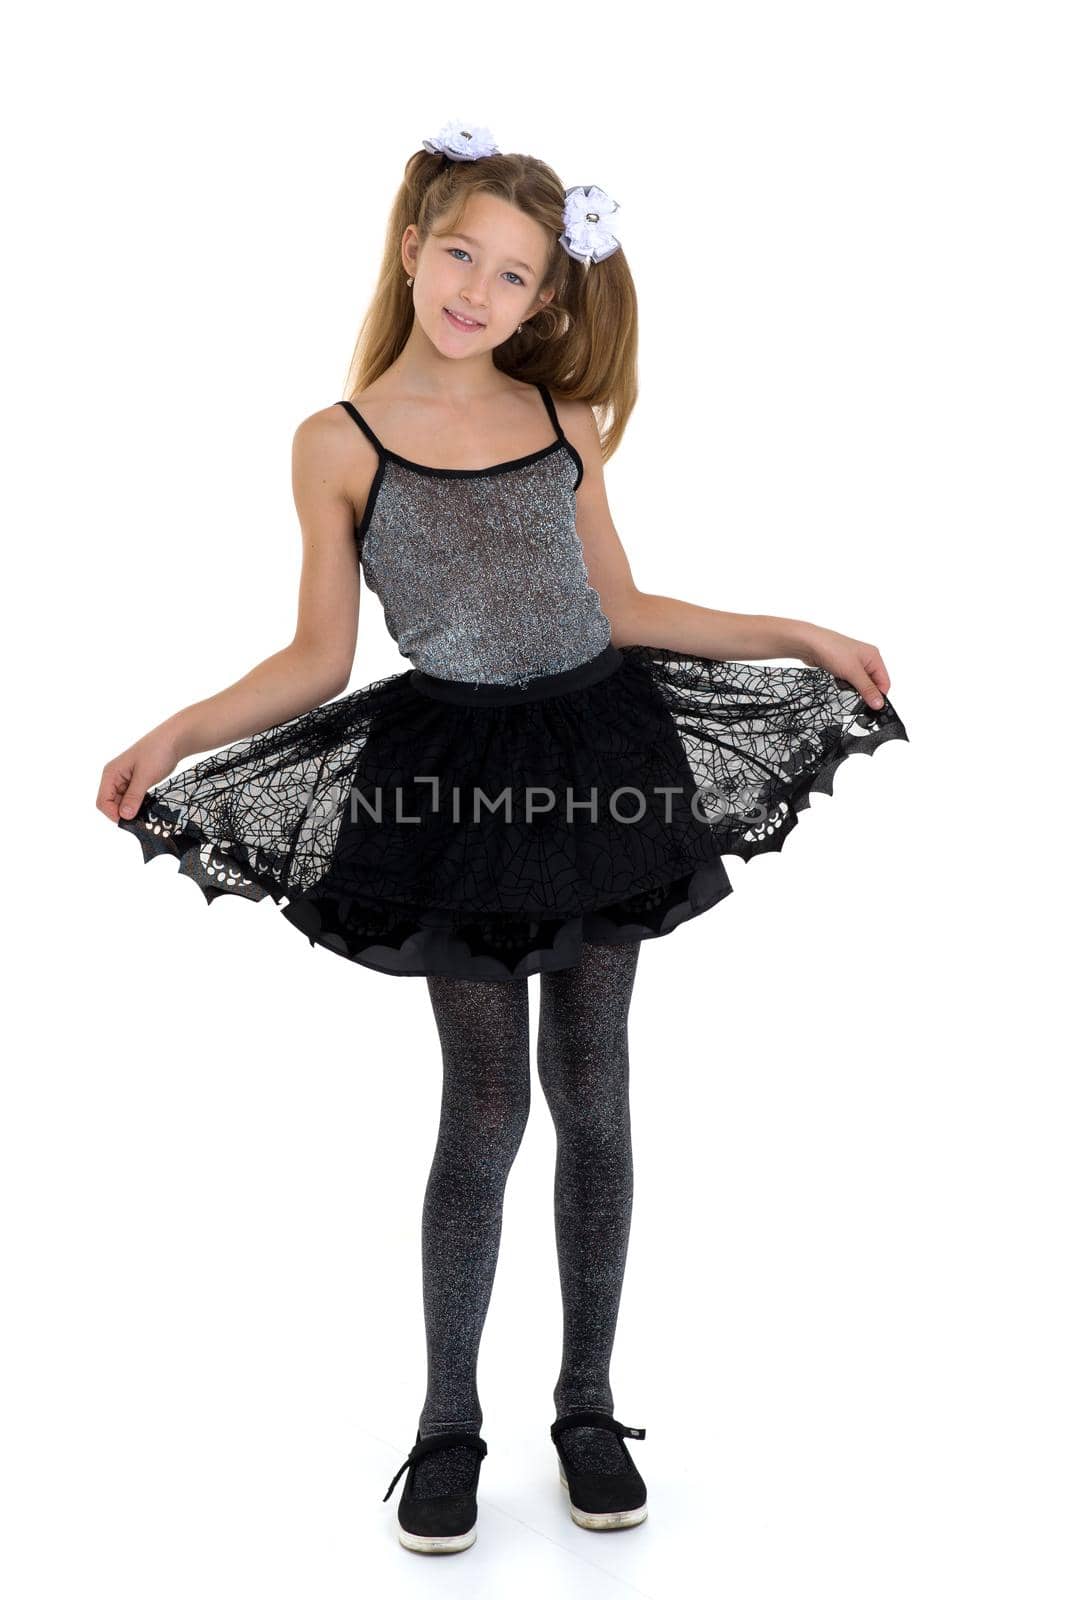 Girl with pigtails in fashionable clothes. Pretty blonde girl in black lace skirt and tank top posing in studio against white background. Full length portrait of preteen child